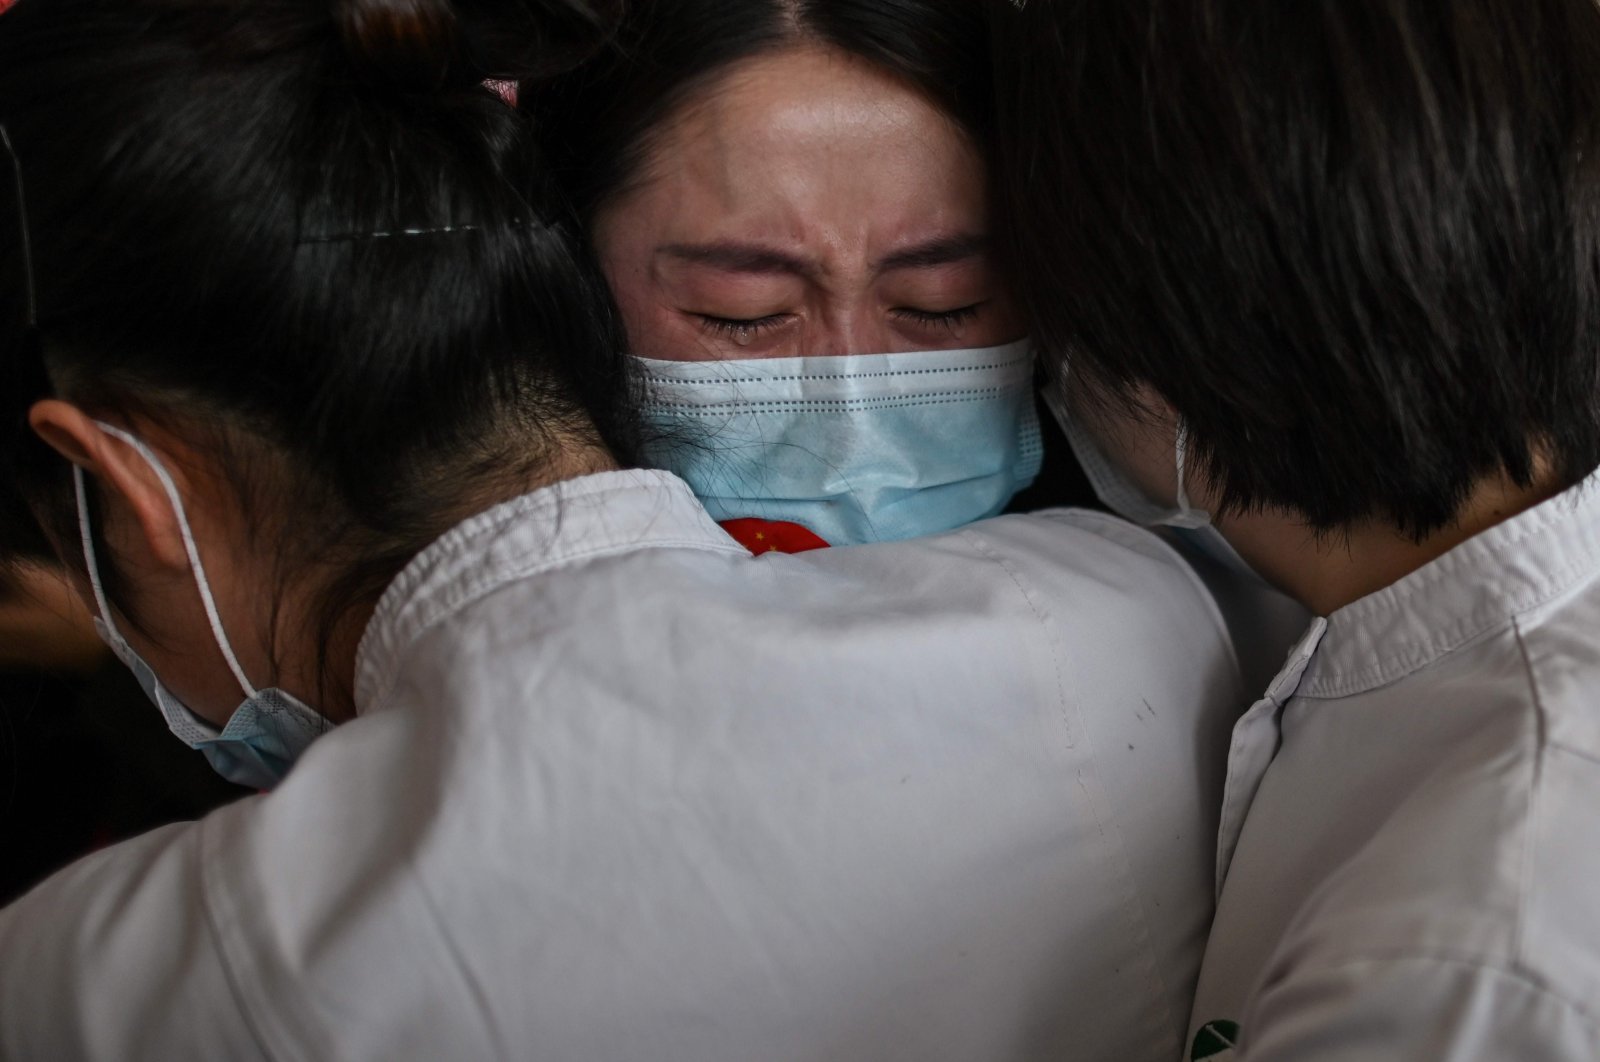 Medical staff from Jilin Province hug nurses from Wuhan after working together during the COVID-19 outbreak during a ceremony before departure at Tianhe Airport in Wuhan, China, April 8, 2020. (AFP Photo)